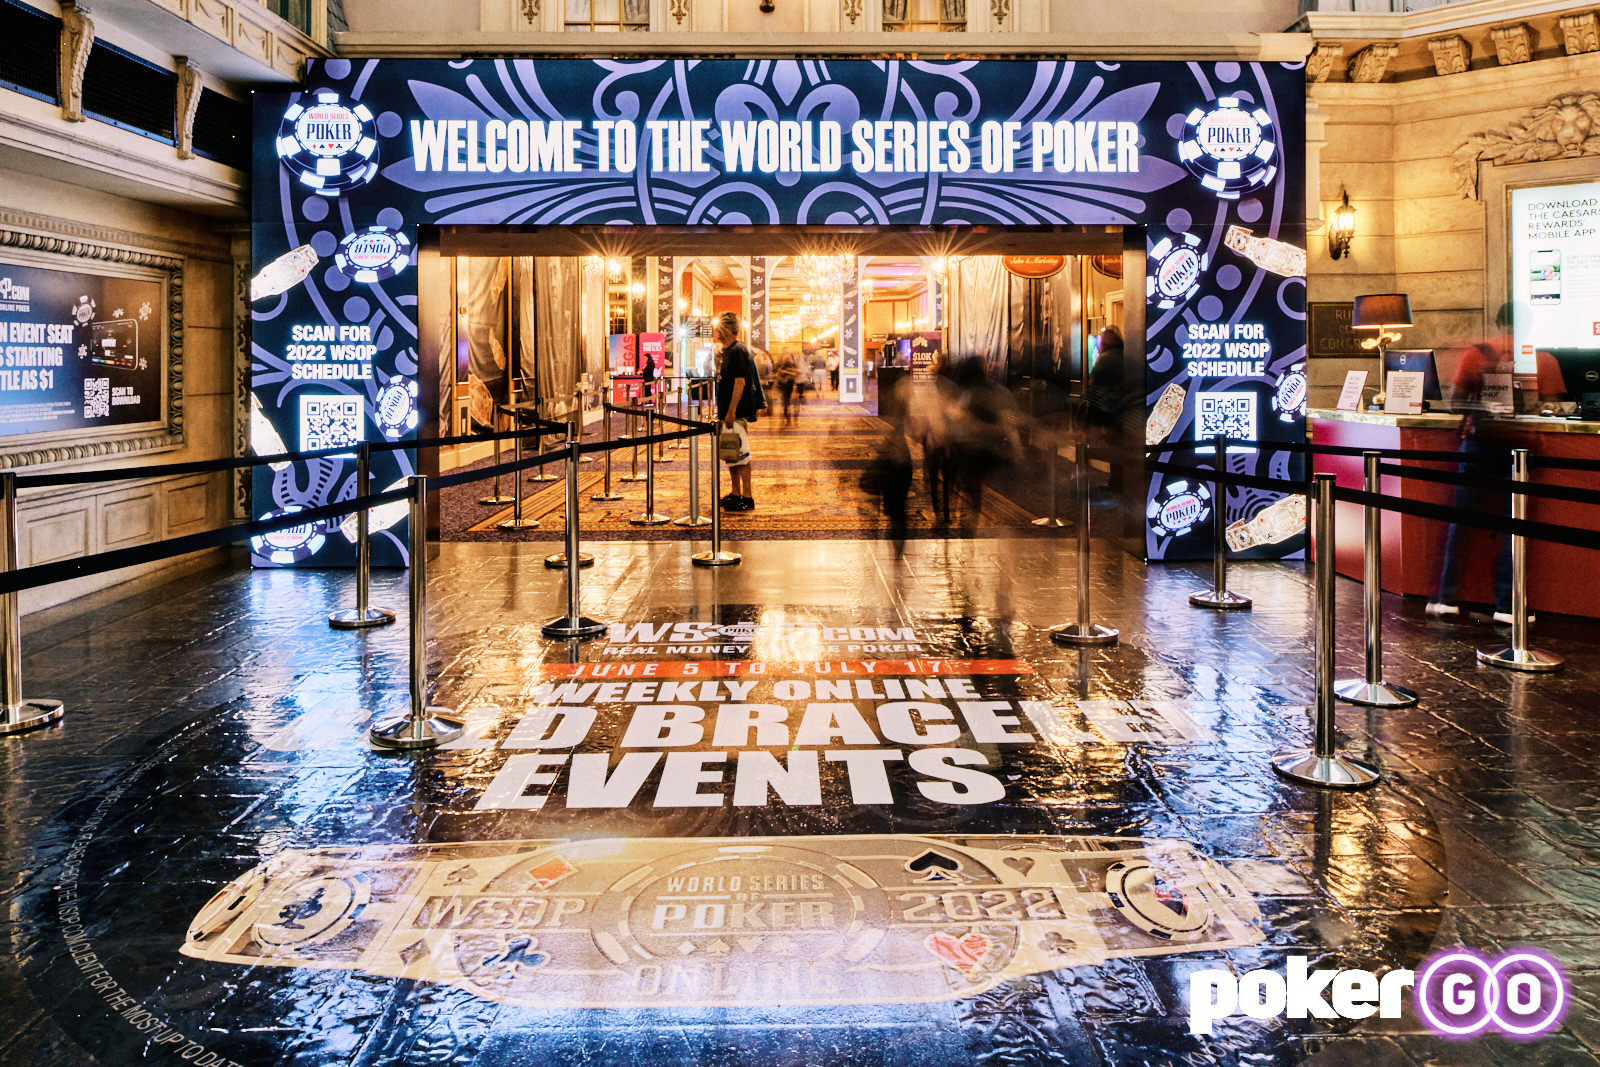 Don't Miss Out: WSOP 2023 Registration Starts in 2 Days. Get ready for WSOP 2023! Register and pay online for events ahead of time, book your entire trip via BravoPokerLive.com, and avoid waiting in long queues.